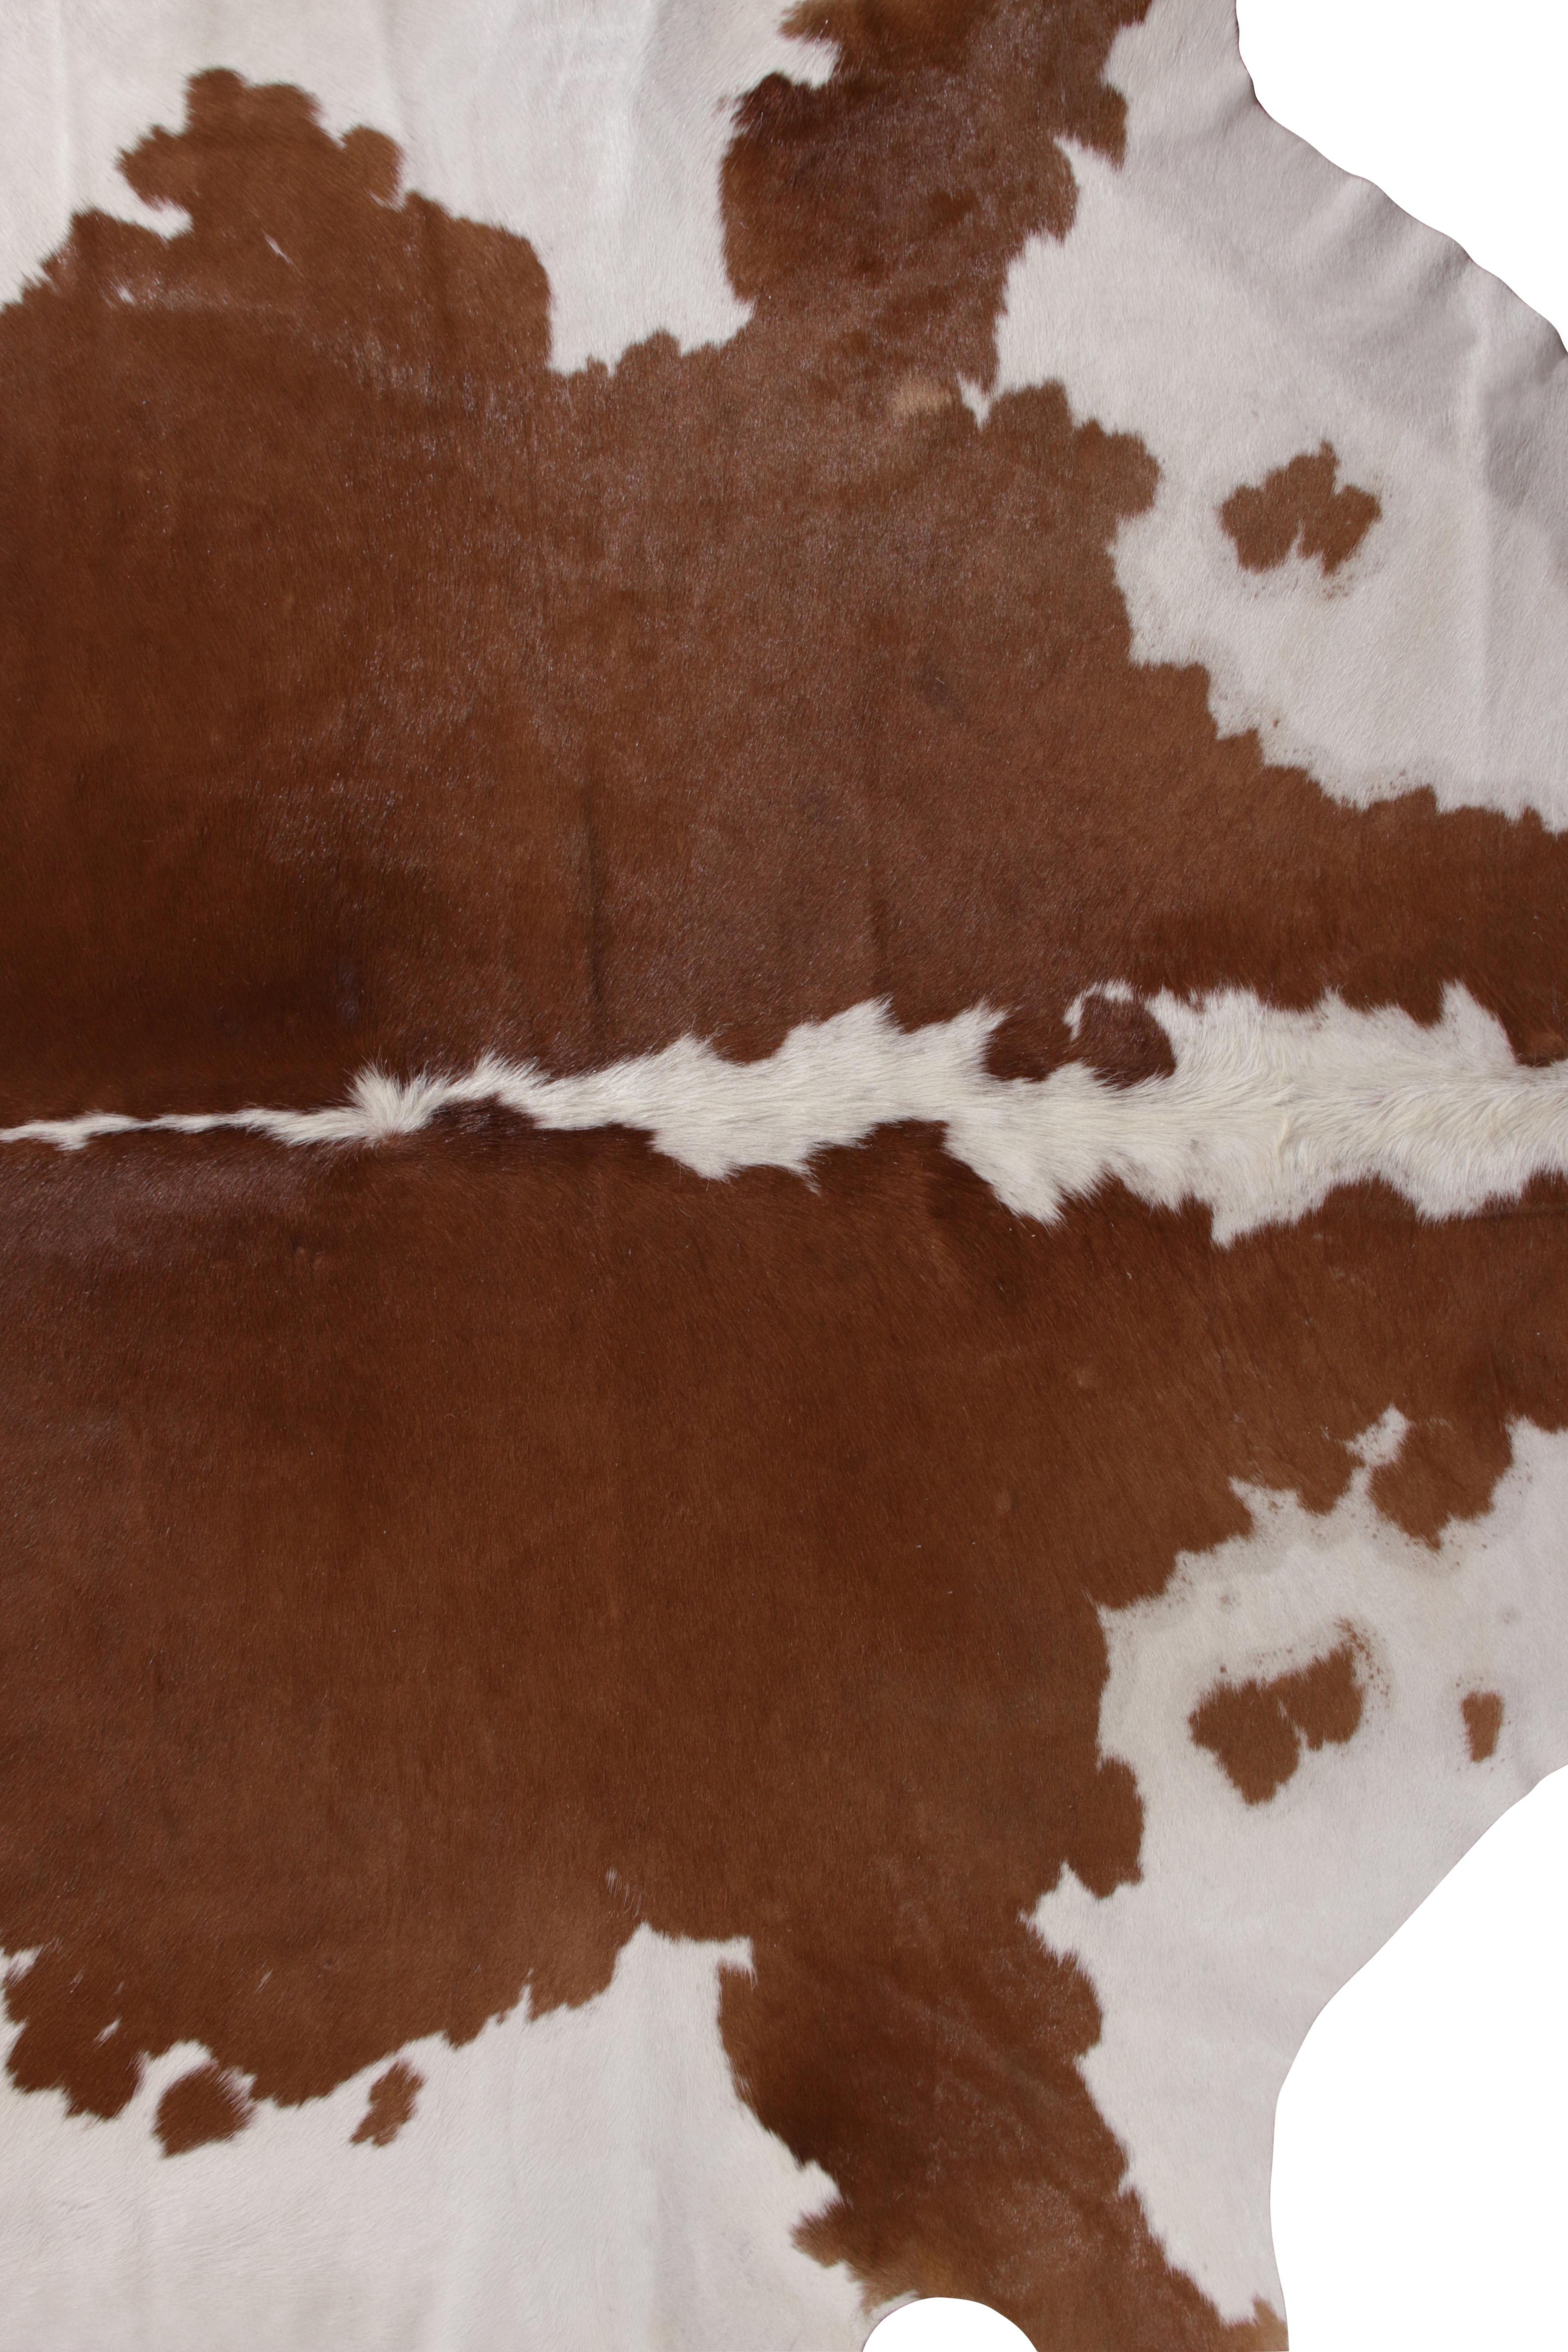 Brazilian Rug & Kilim’s Contemporary Cowhide Rug in White and Beige-Brown